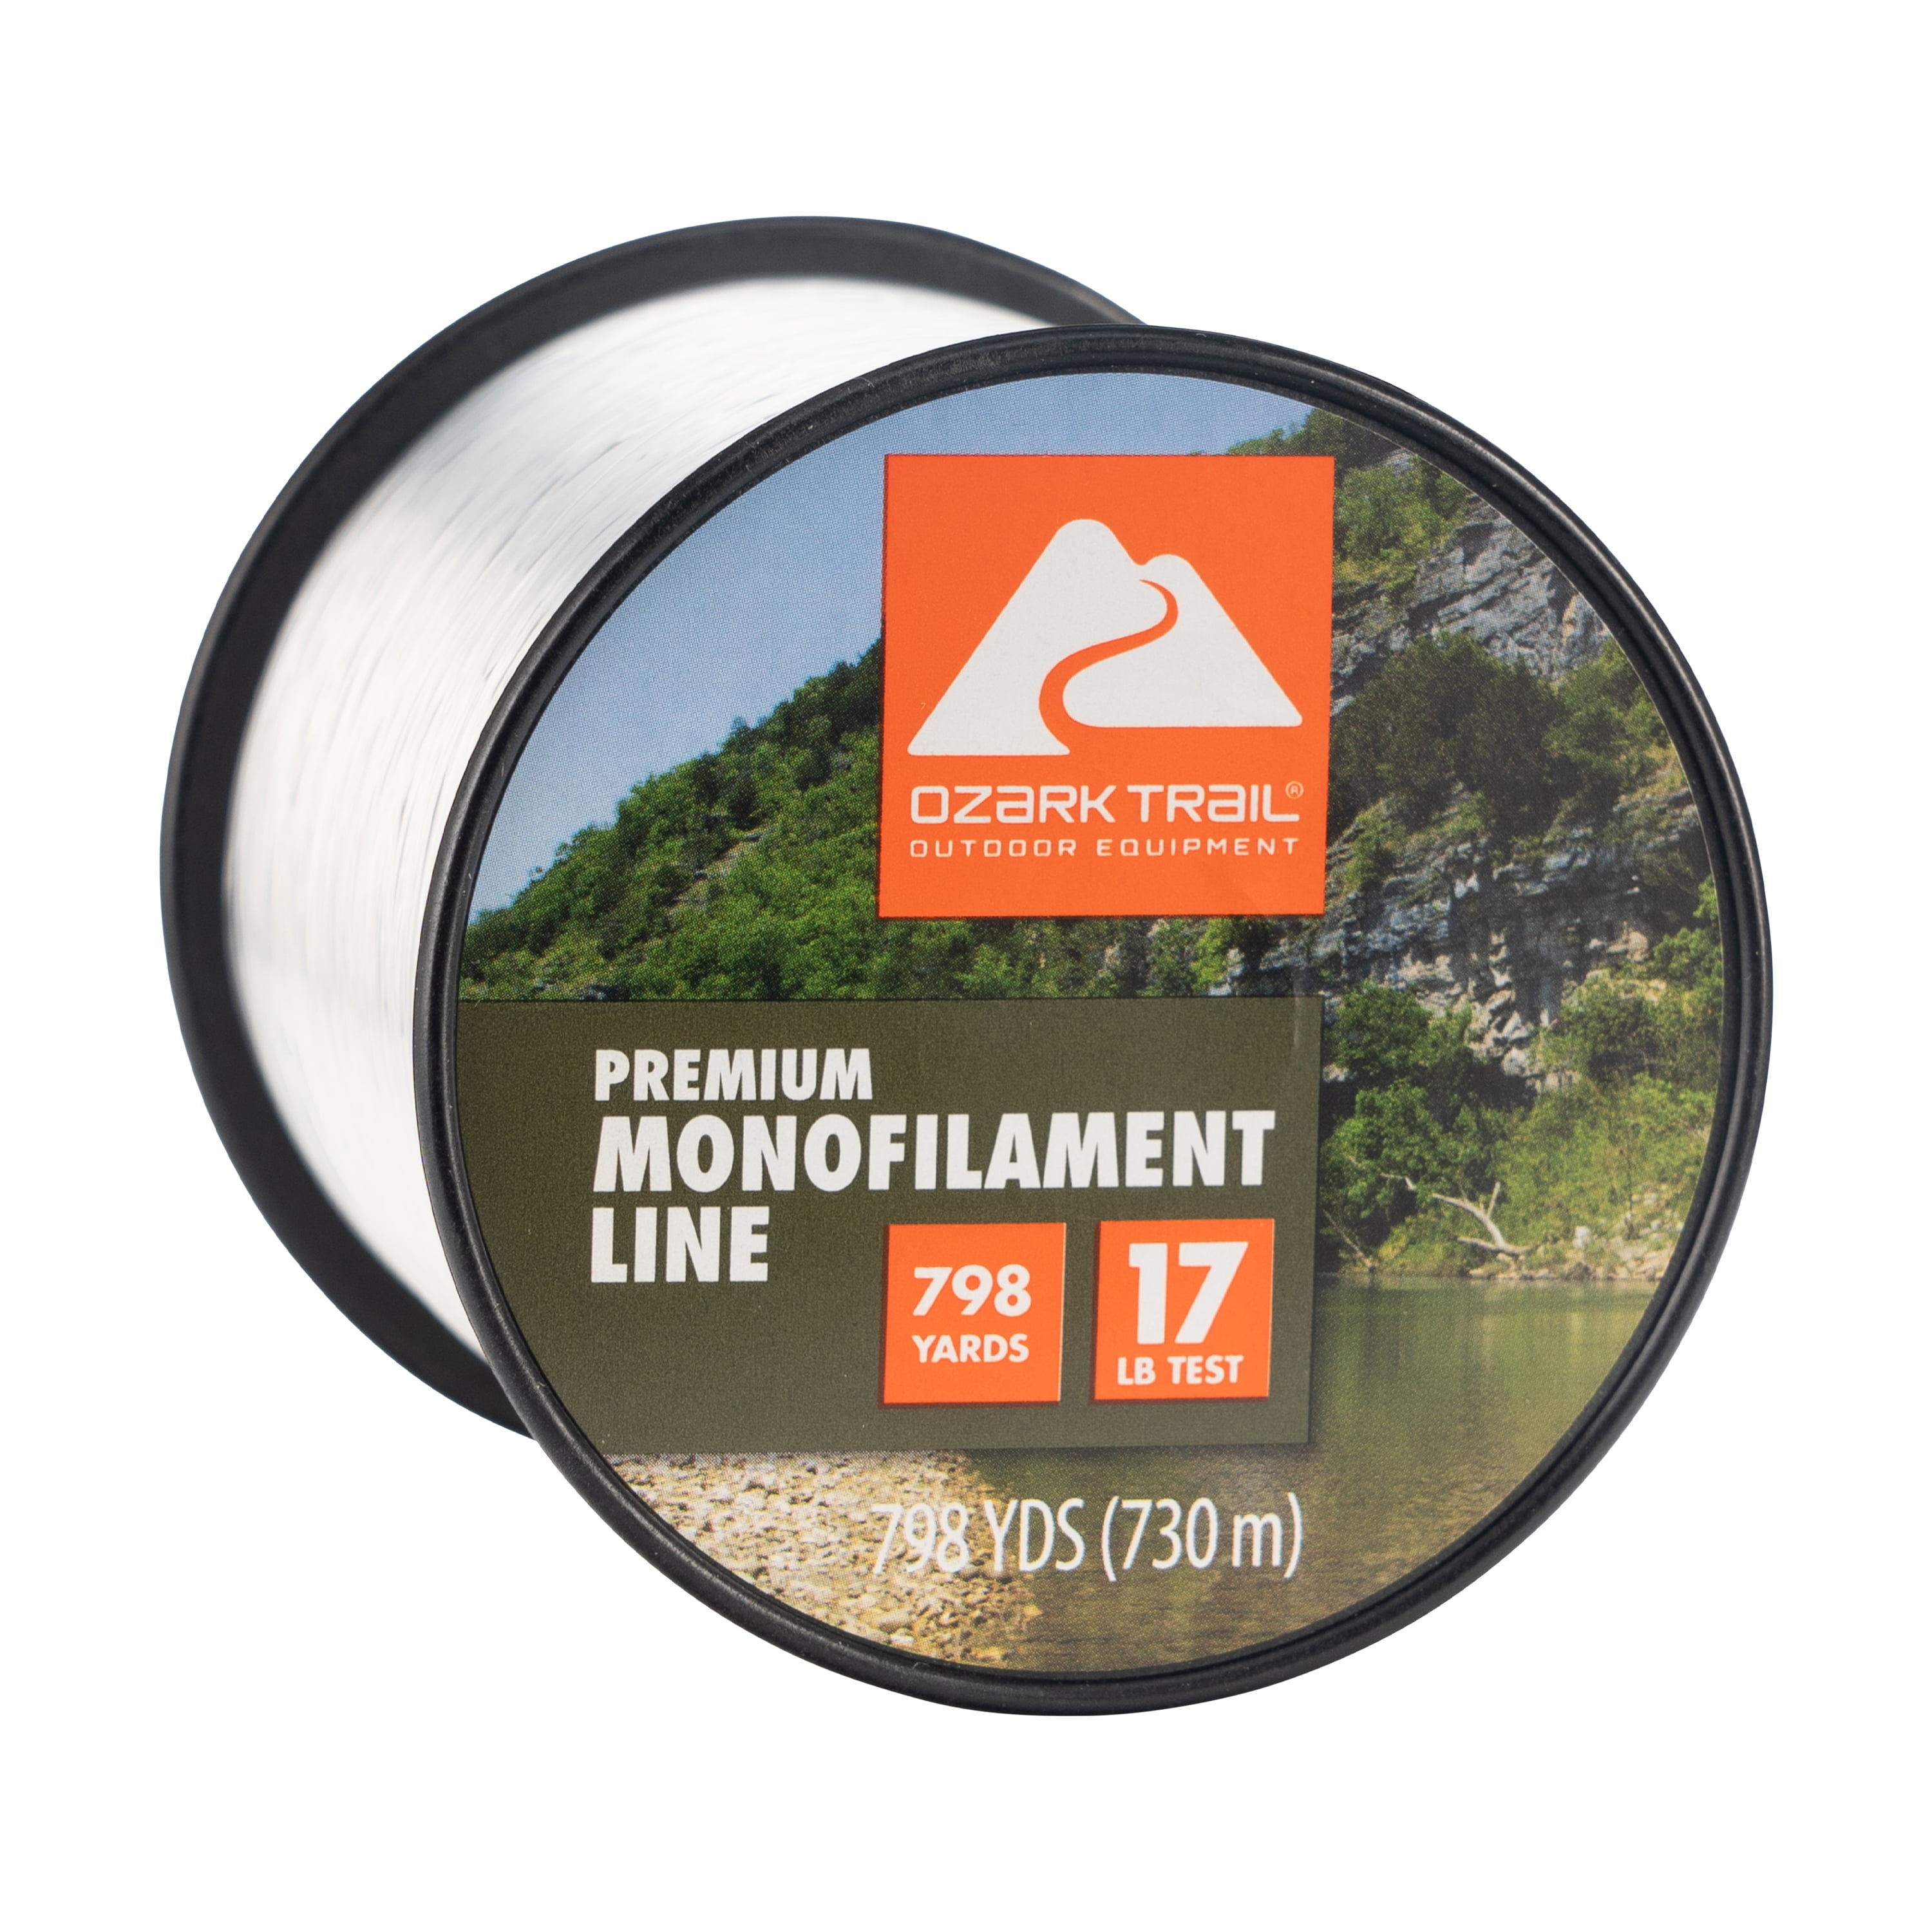 Advance Monofilament 1200yd - Modern Outdoor Tackle